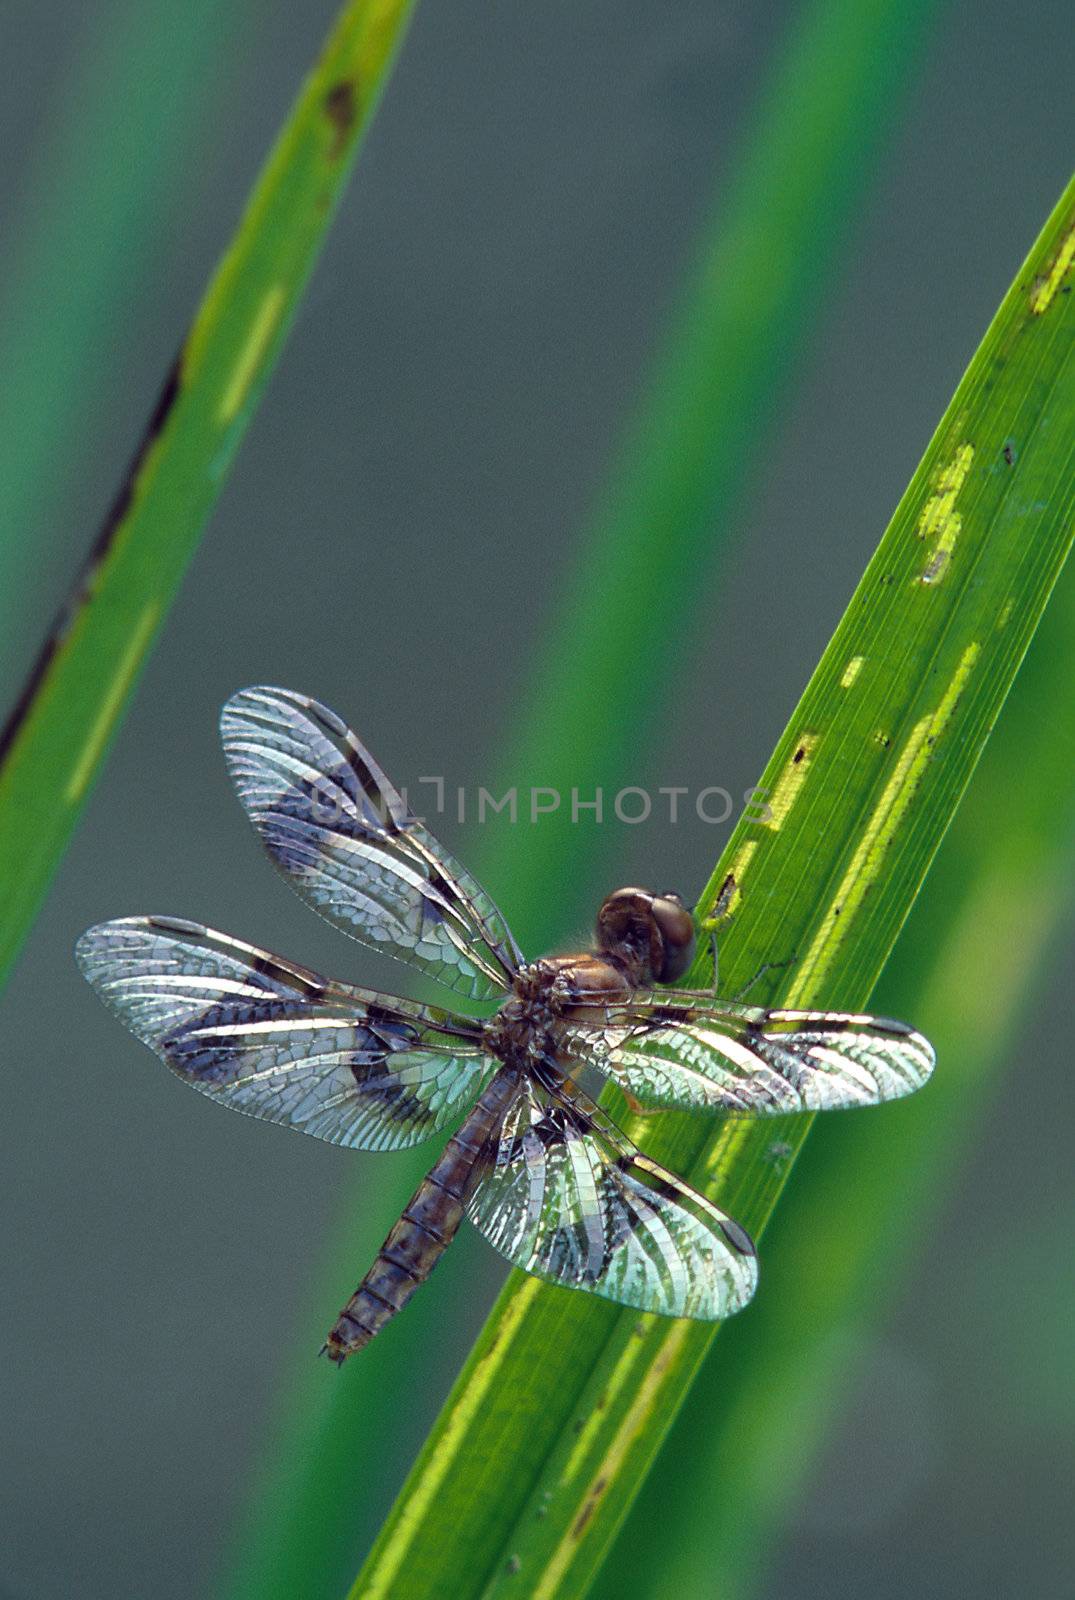 Dragonfly with shiny wings on grass stems